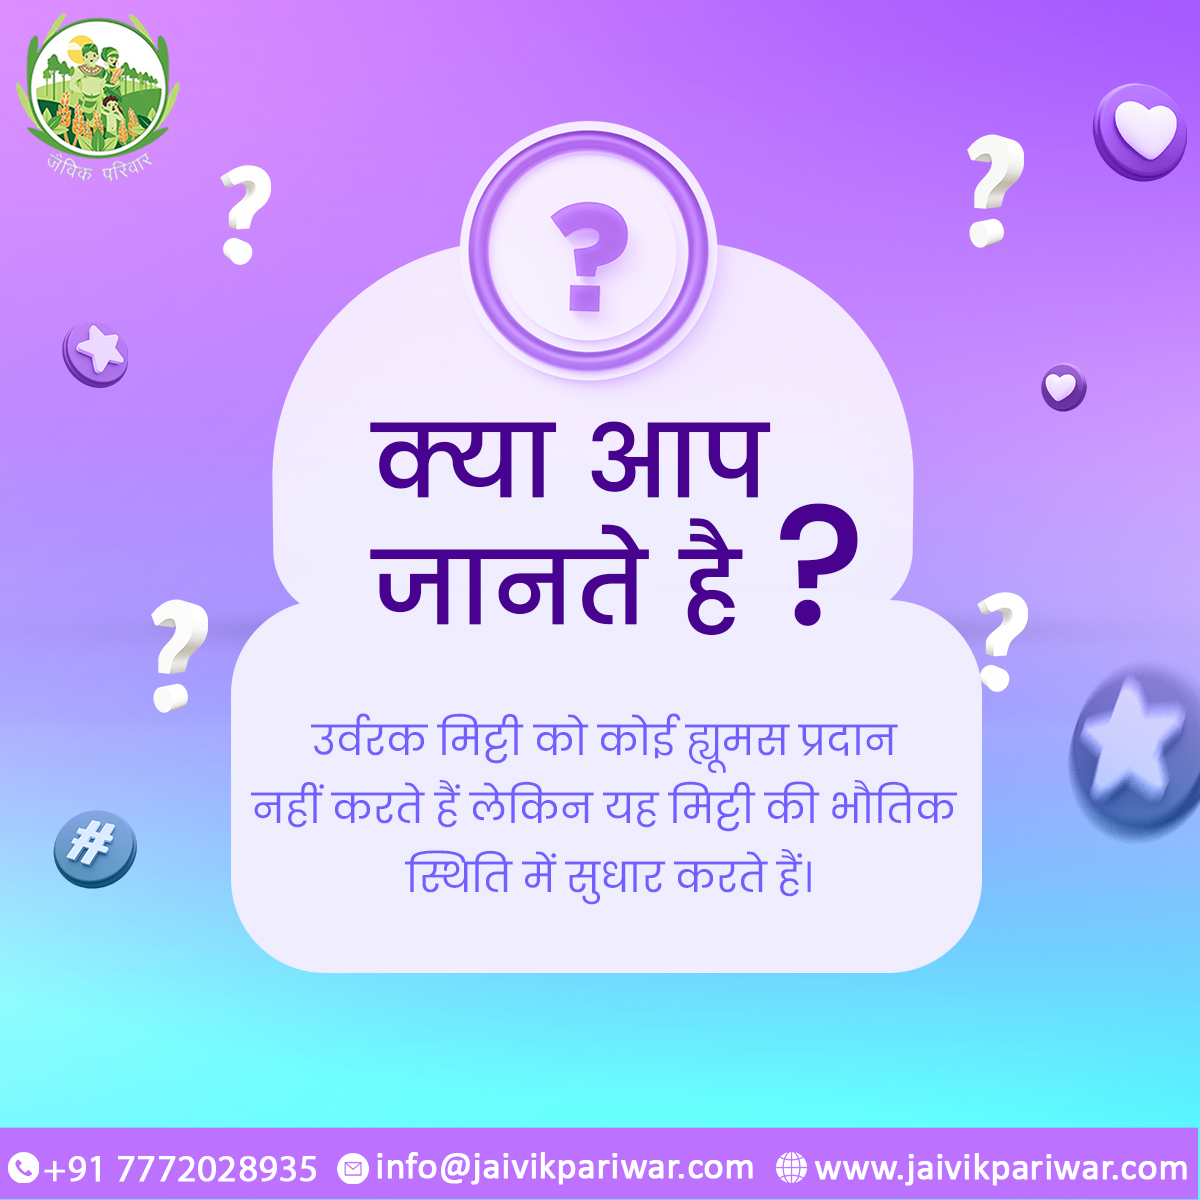 क्या आप जानते है ? ❓
.
.
.
#DidYouKnow #FunFacts #InterestingFacts #Trivia #KnowledgeNuggets
#FascinatingFacts #DYK #FactOfTheDay #LearnSomethingNew #DidYouKnowThis
#AmazingFacts #MindBlown #EducationalFacts #CuriousFacts #DYKFacts #Factoids
#DidYouKnowThat #FactCheck